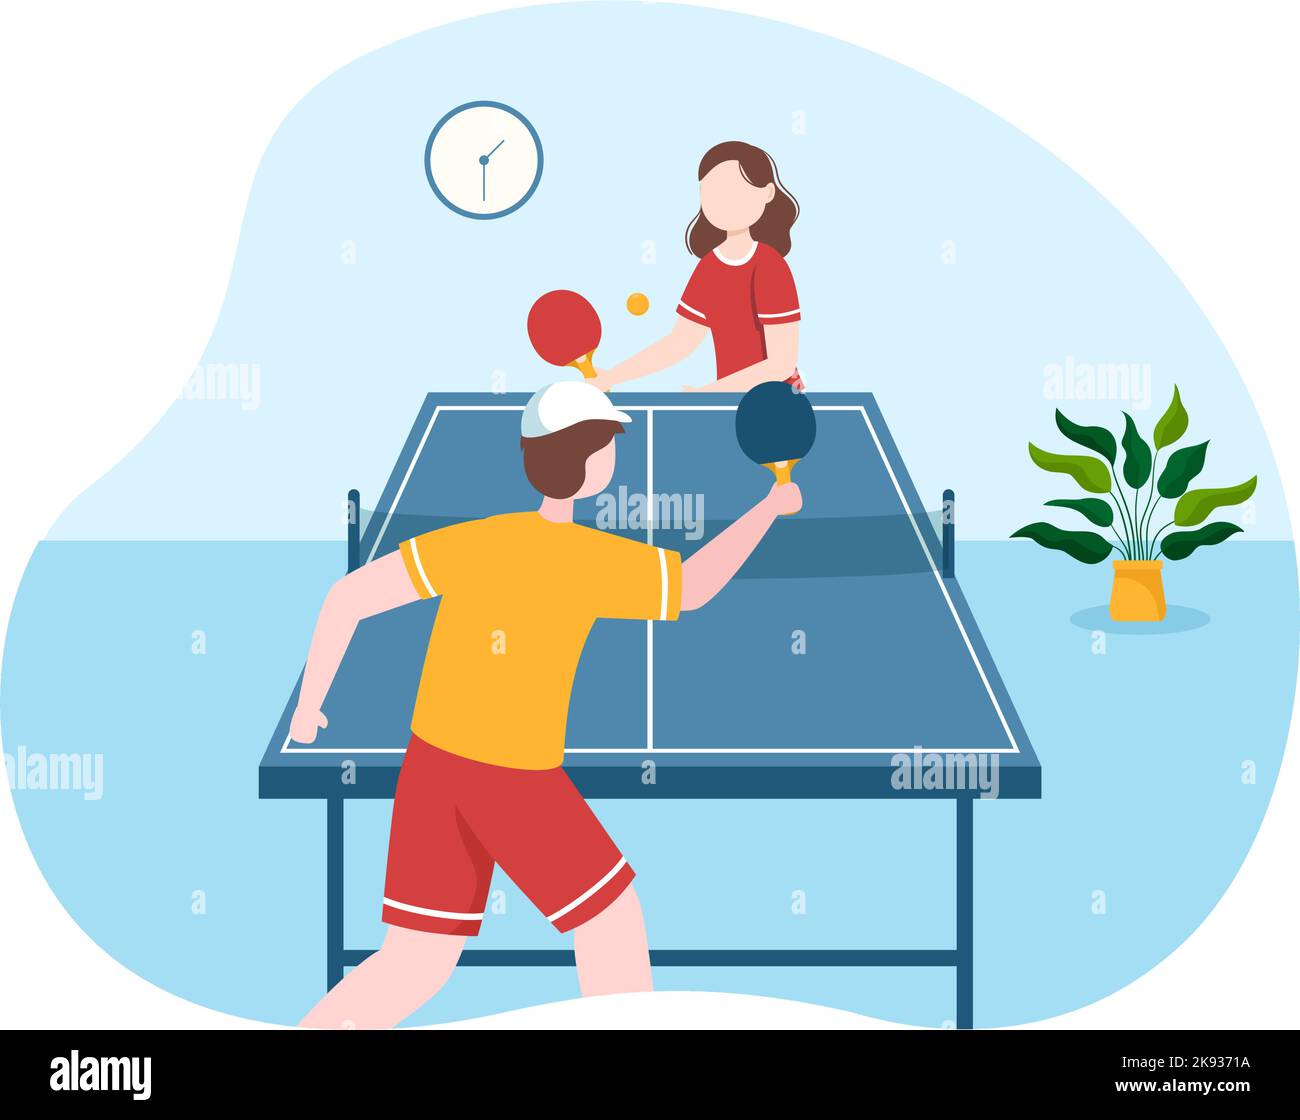 People Playing Table Tennis Sports with Racket and Ball of Ping Pong Game Match in Flat Cartoon Hand Drawn Templates Illustration Stock Vector